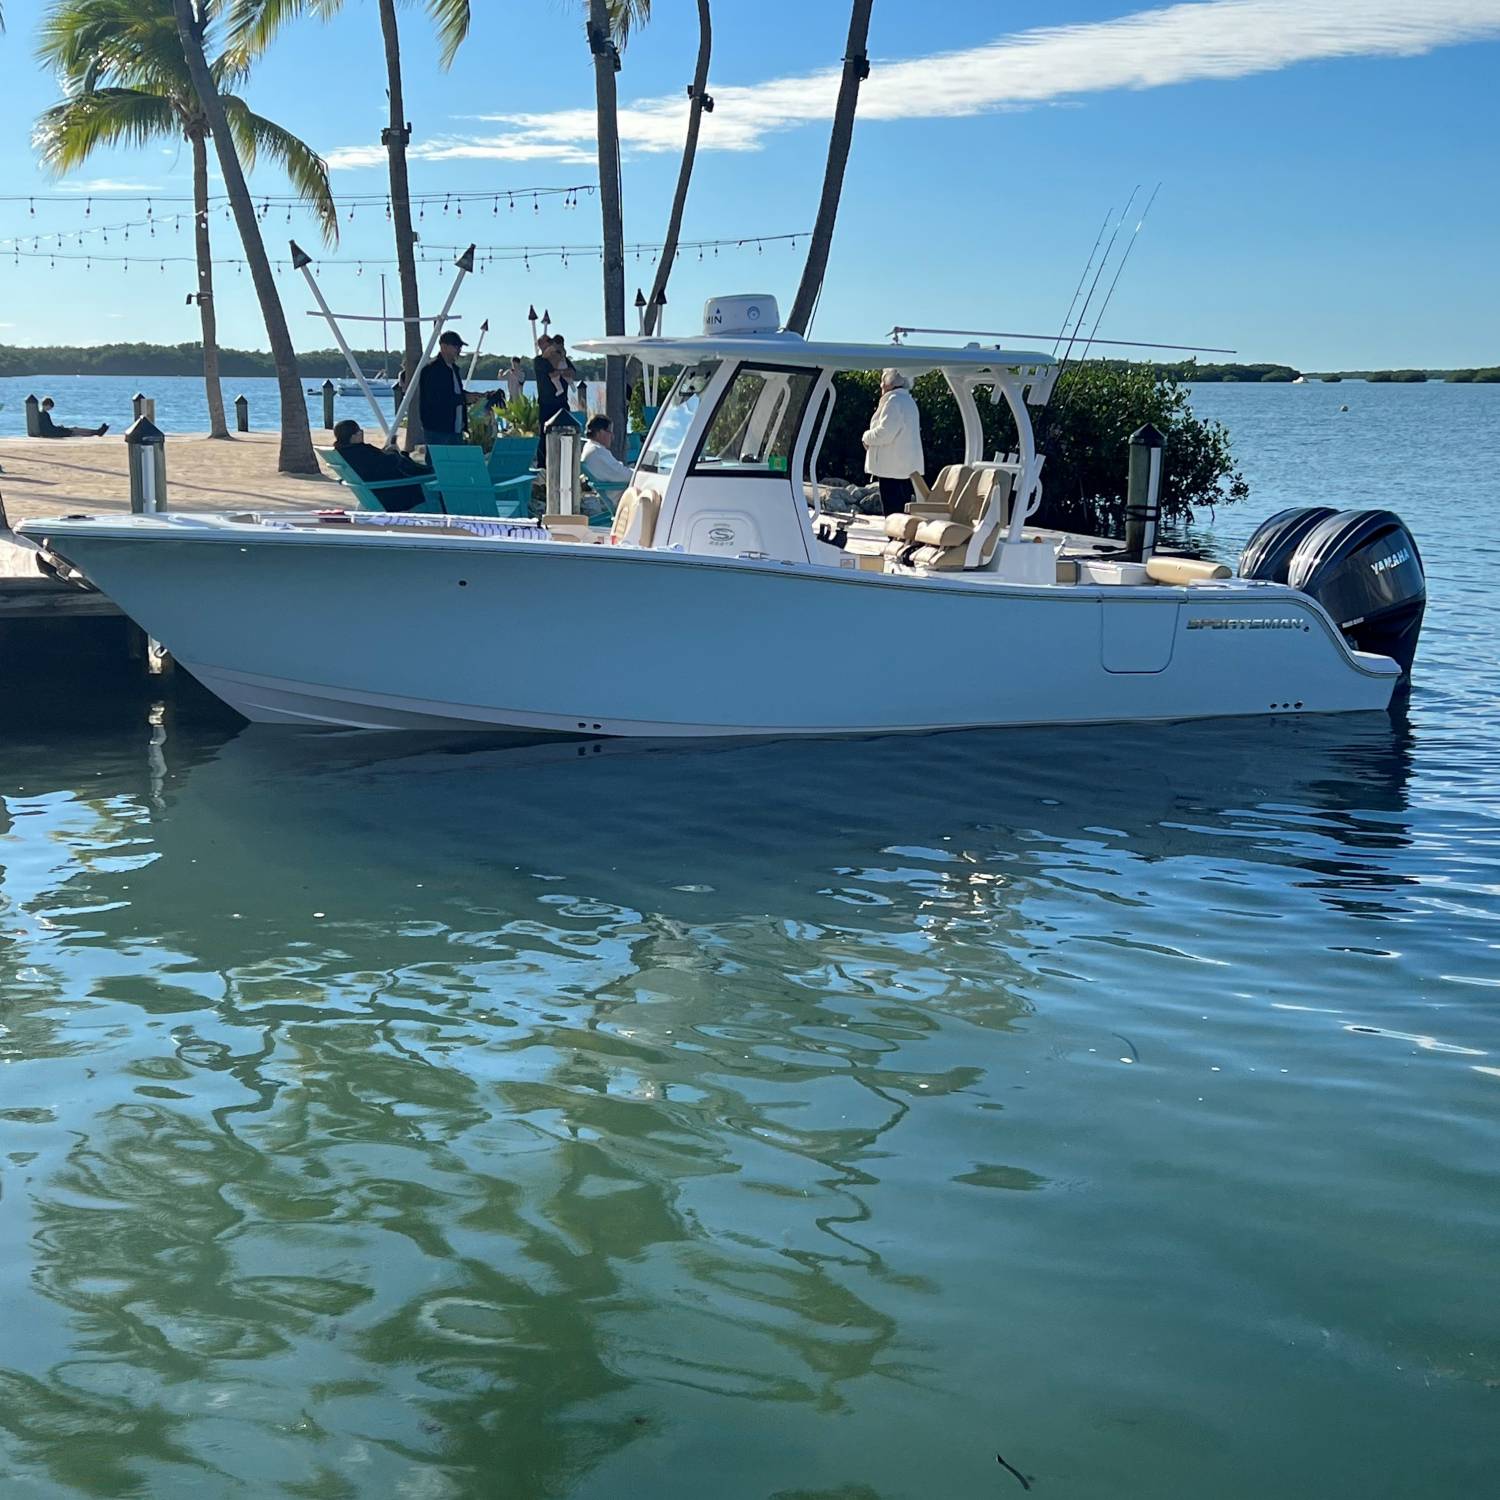 Title: Docked in Islamorada for lunch... - On board their Sportsman Open 282TE Center Console - Location: Islamorada, FL. Participating in the Photo Contest #SportsmanFebruary2023